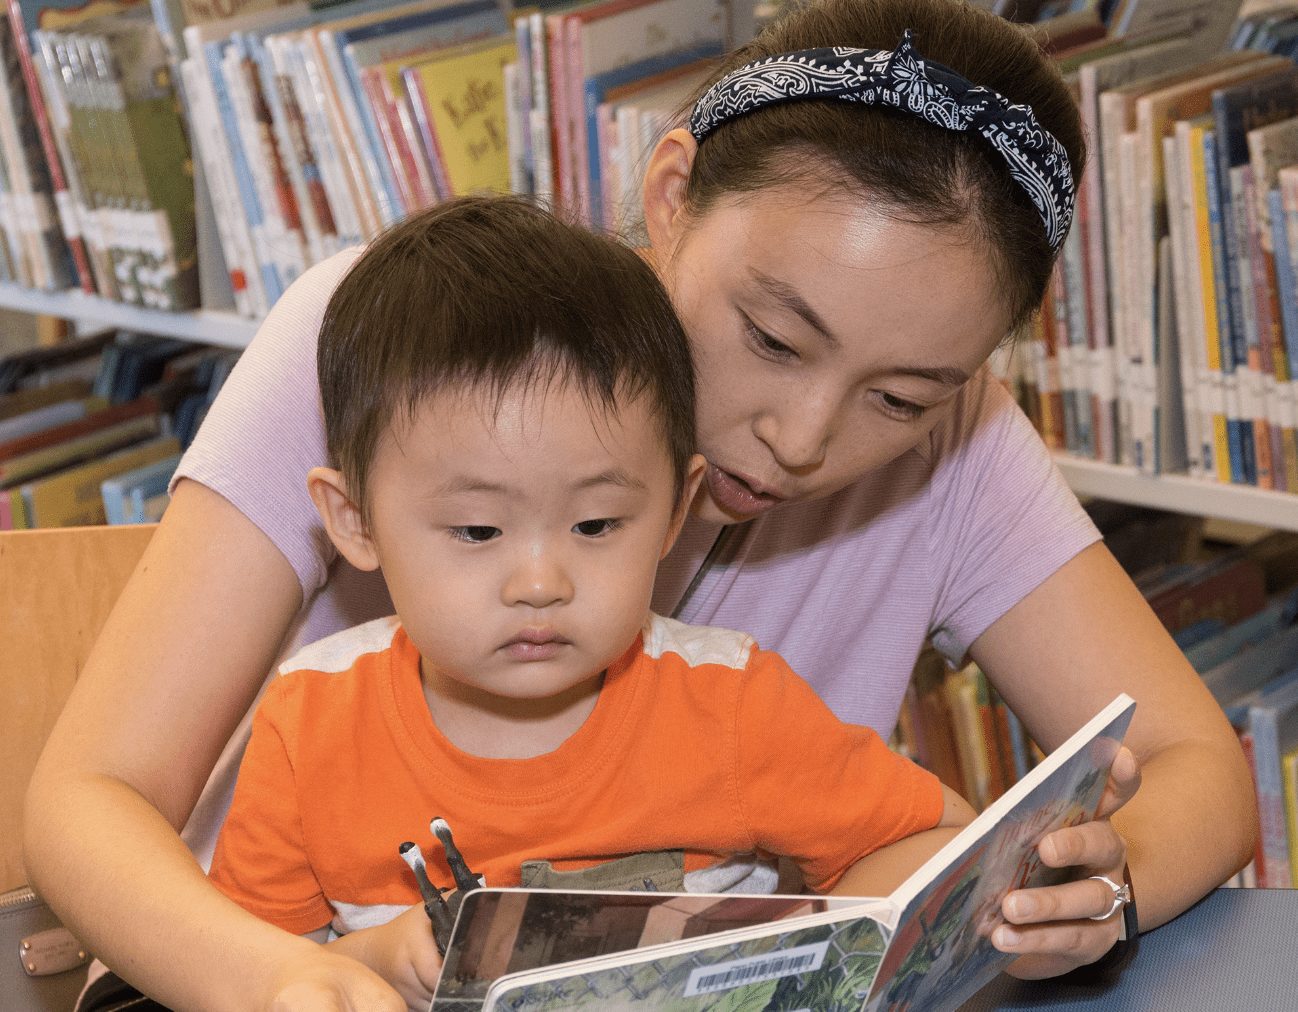 Local Program Promotes Reading Readiness for Young Kids